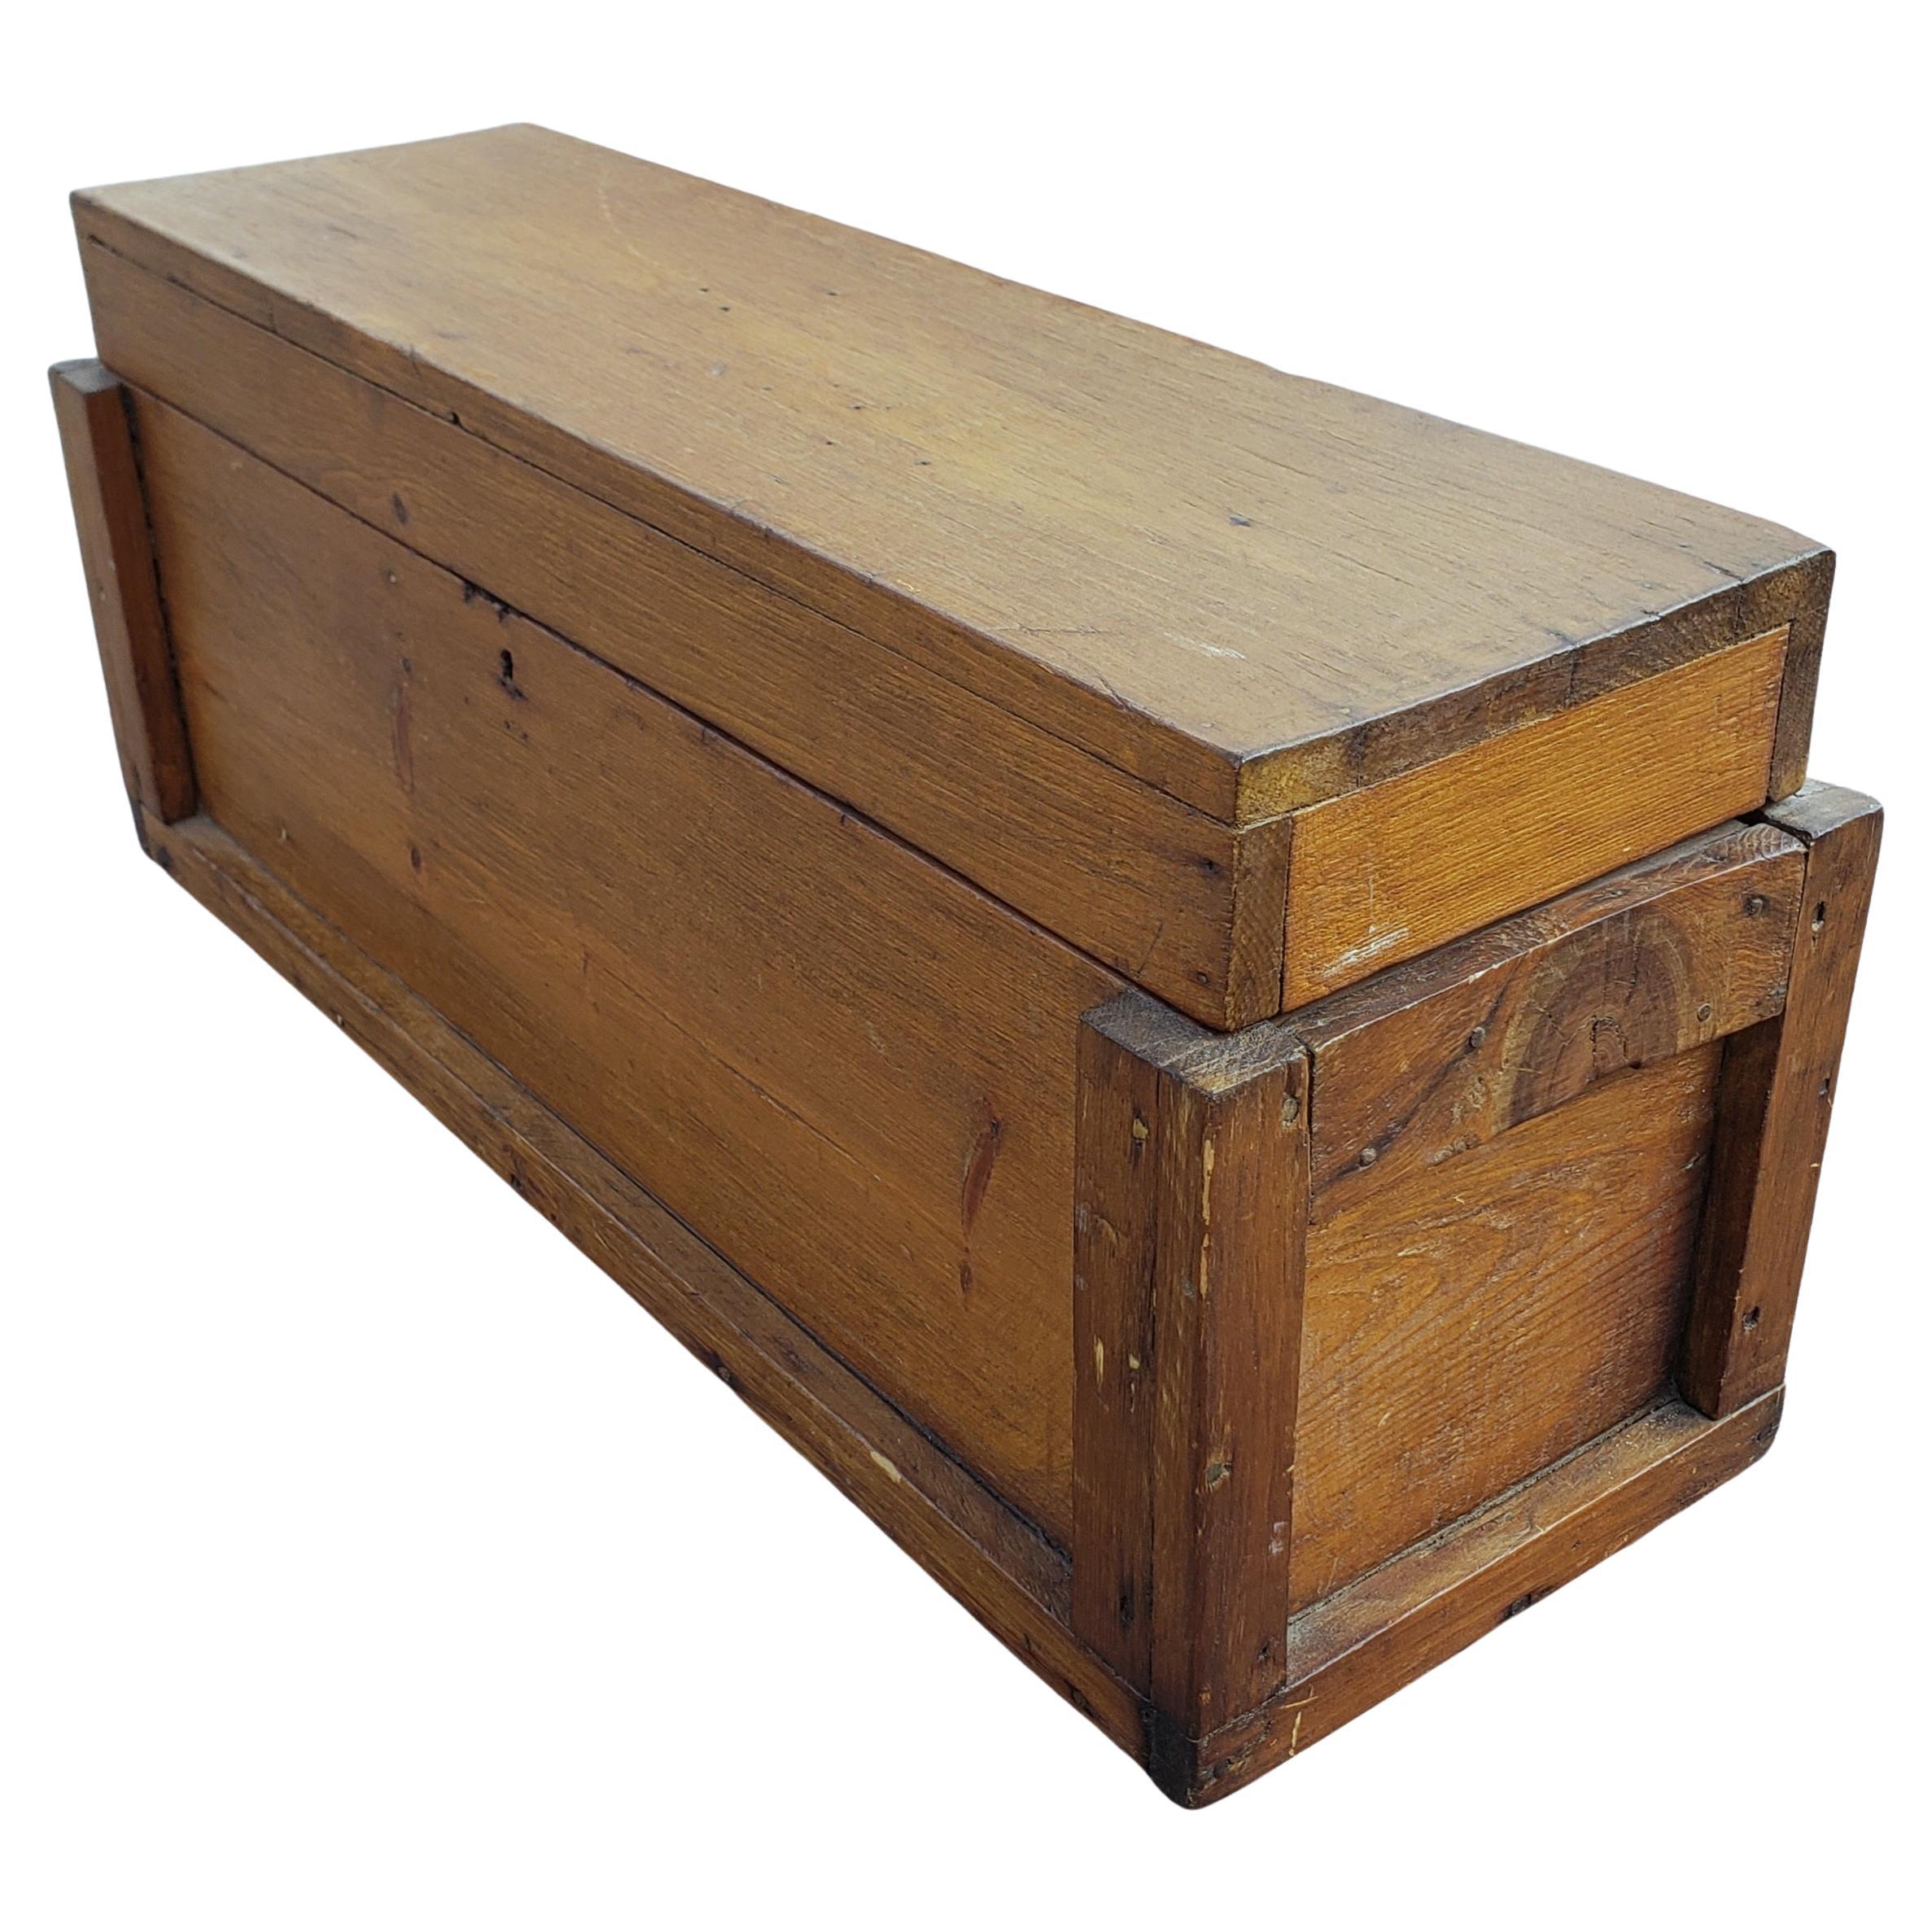 Early 20th Century American Primitive Wooden Tool Box In Good Condition For Sale In Germantown, MD